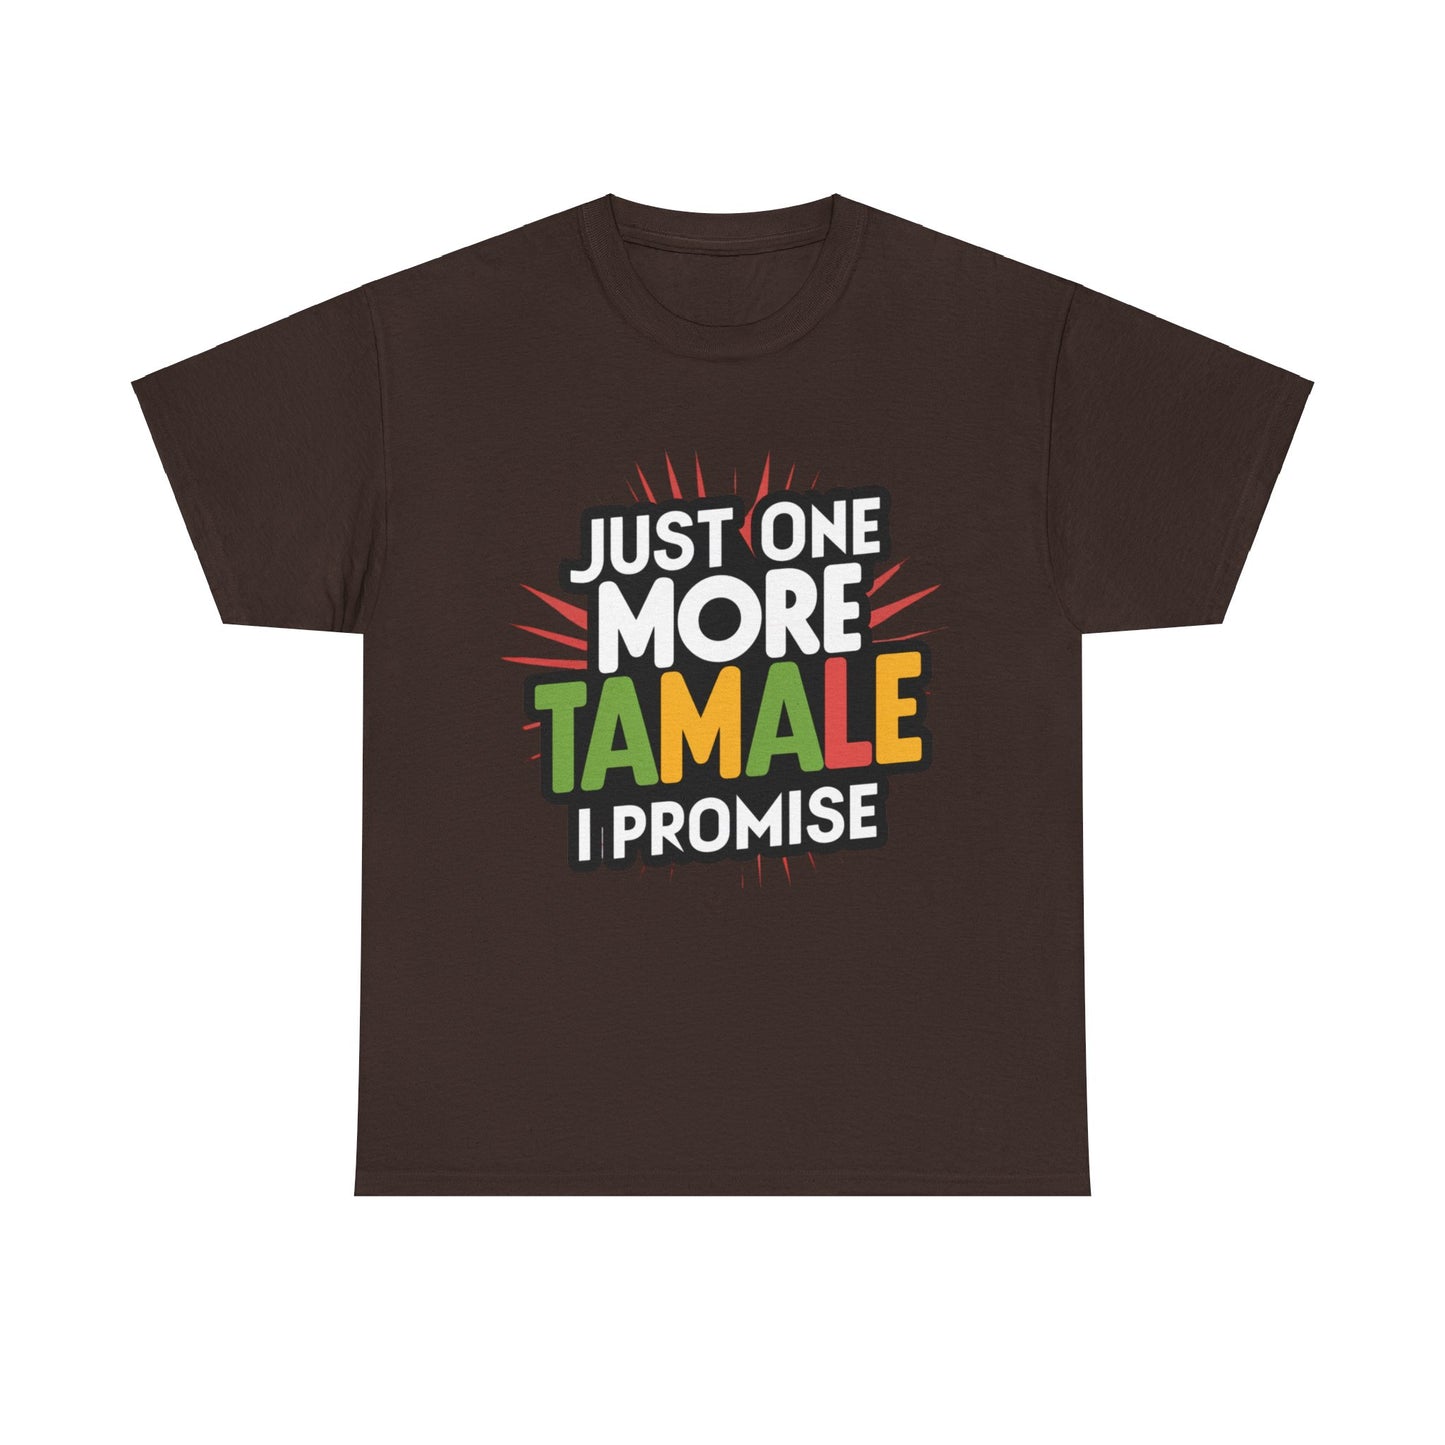 Just One More Tamale I Promise Mexican Food Graphic Unisex Heavy Cotton Tee Cotton Funny Humorous Graphic Soft Premium Unisex Men Women Dark Chocolate T-shirt Birthday Gift-3